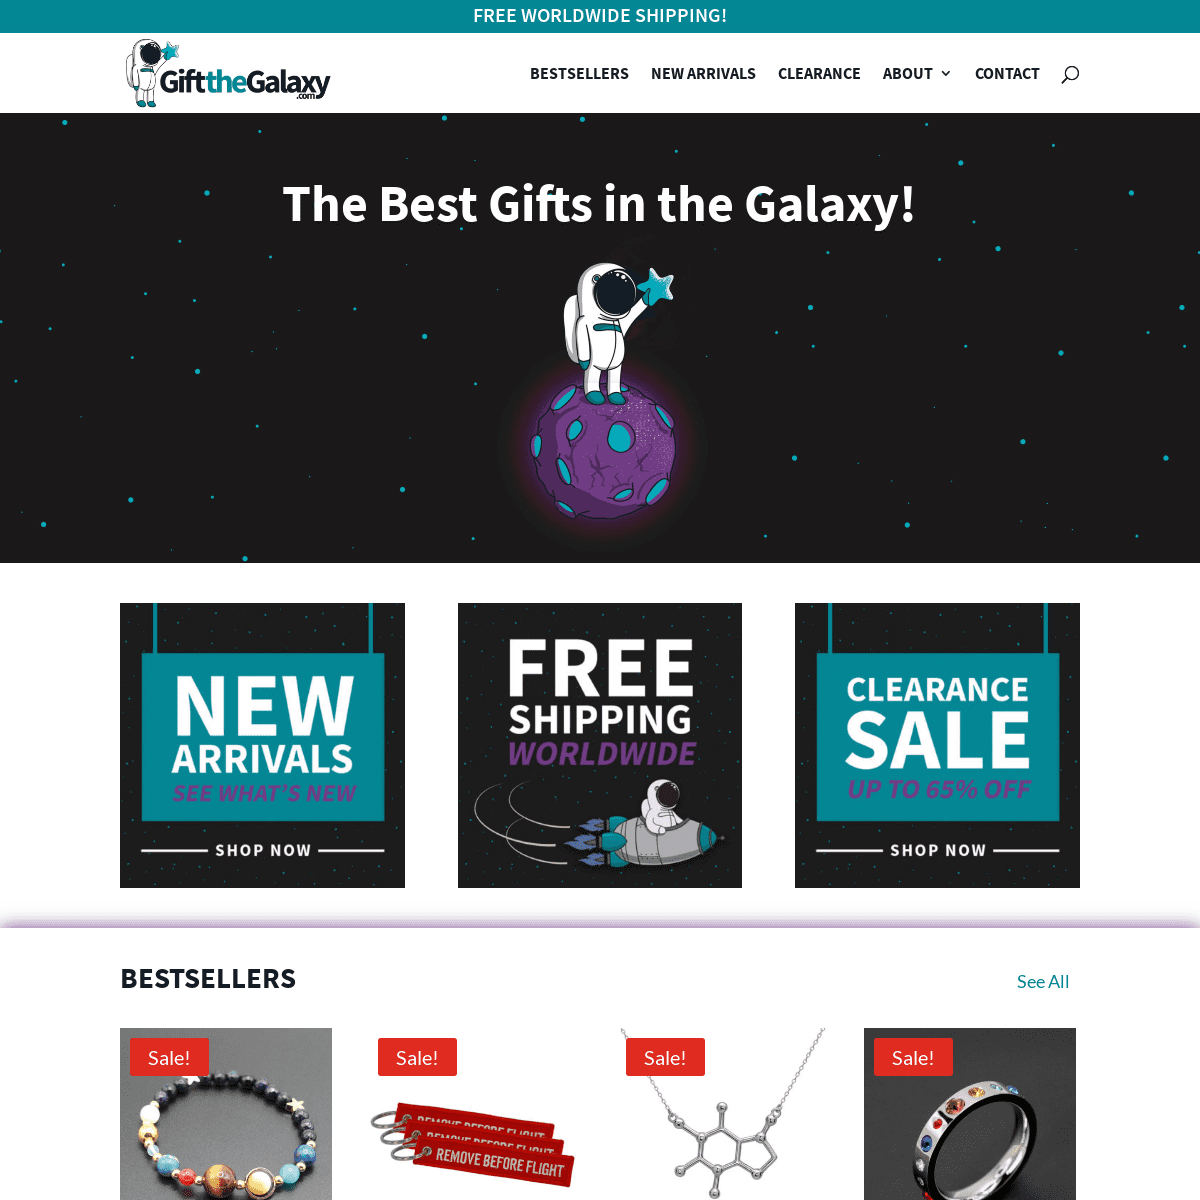 A complete backup of giftthegalaxy.com